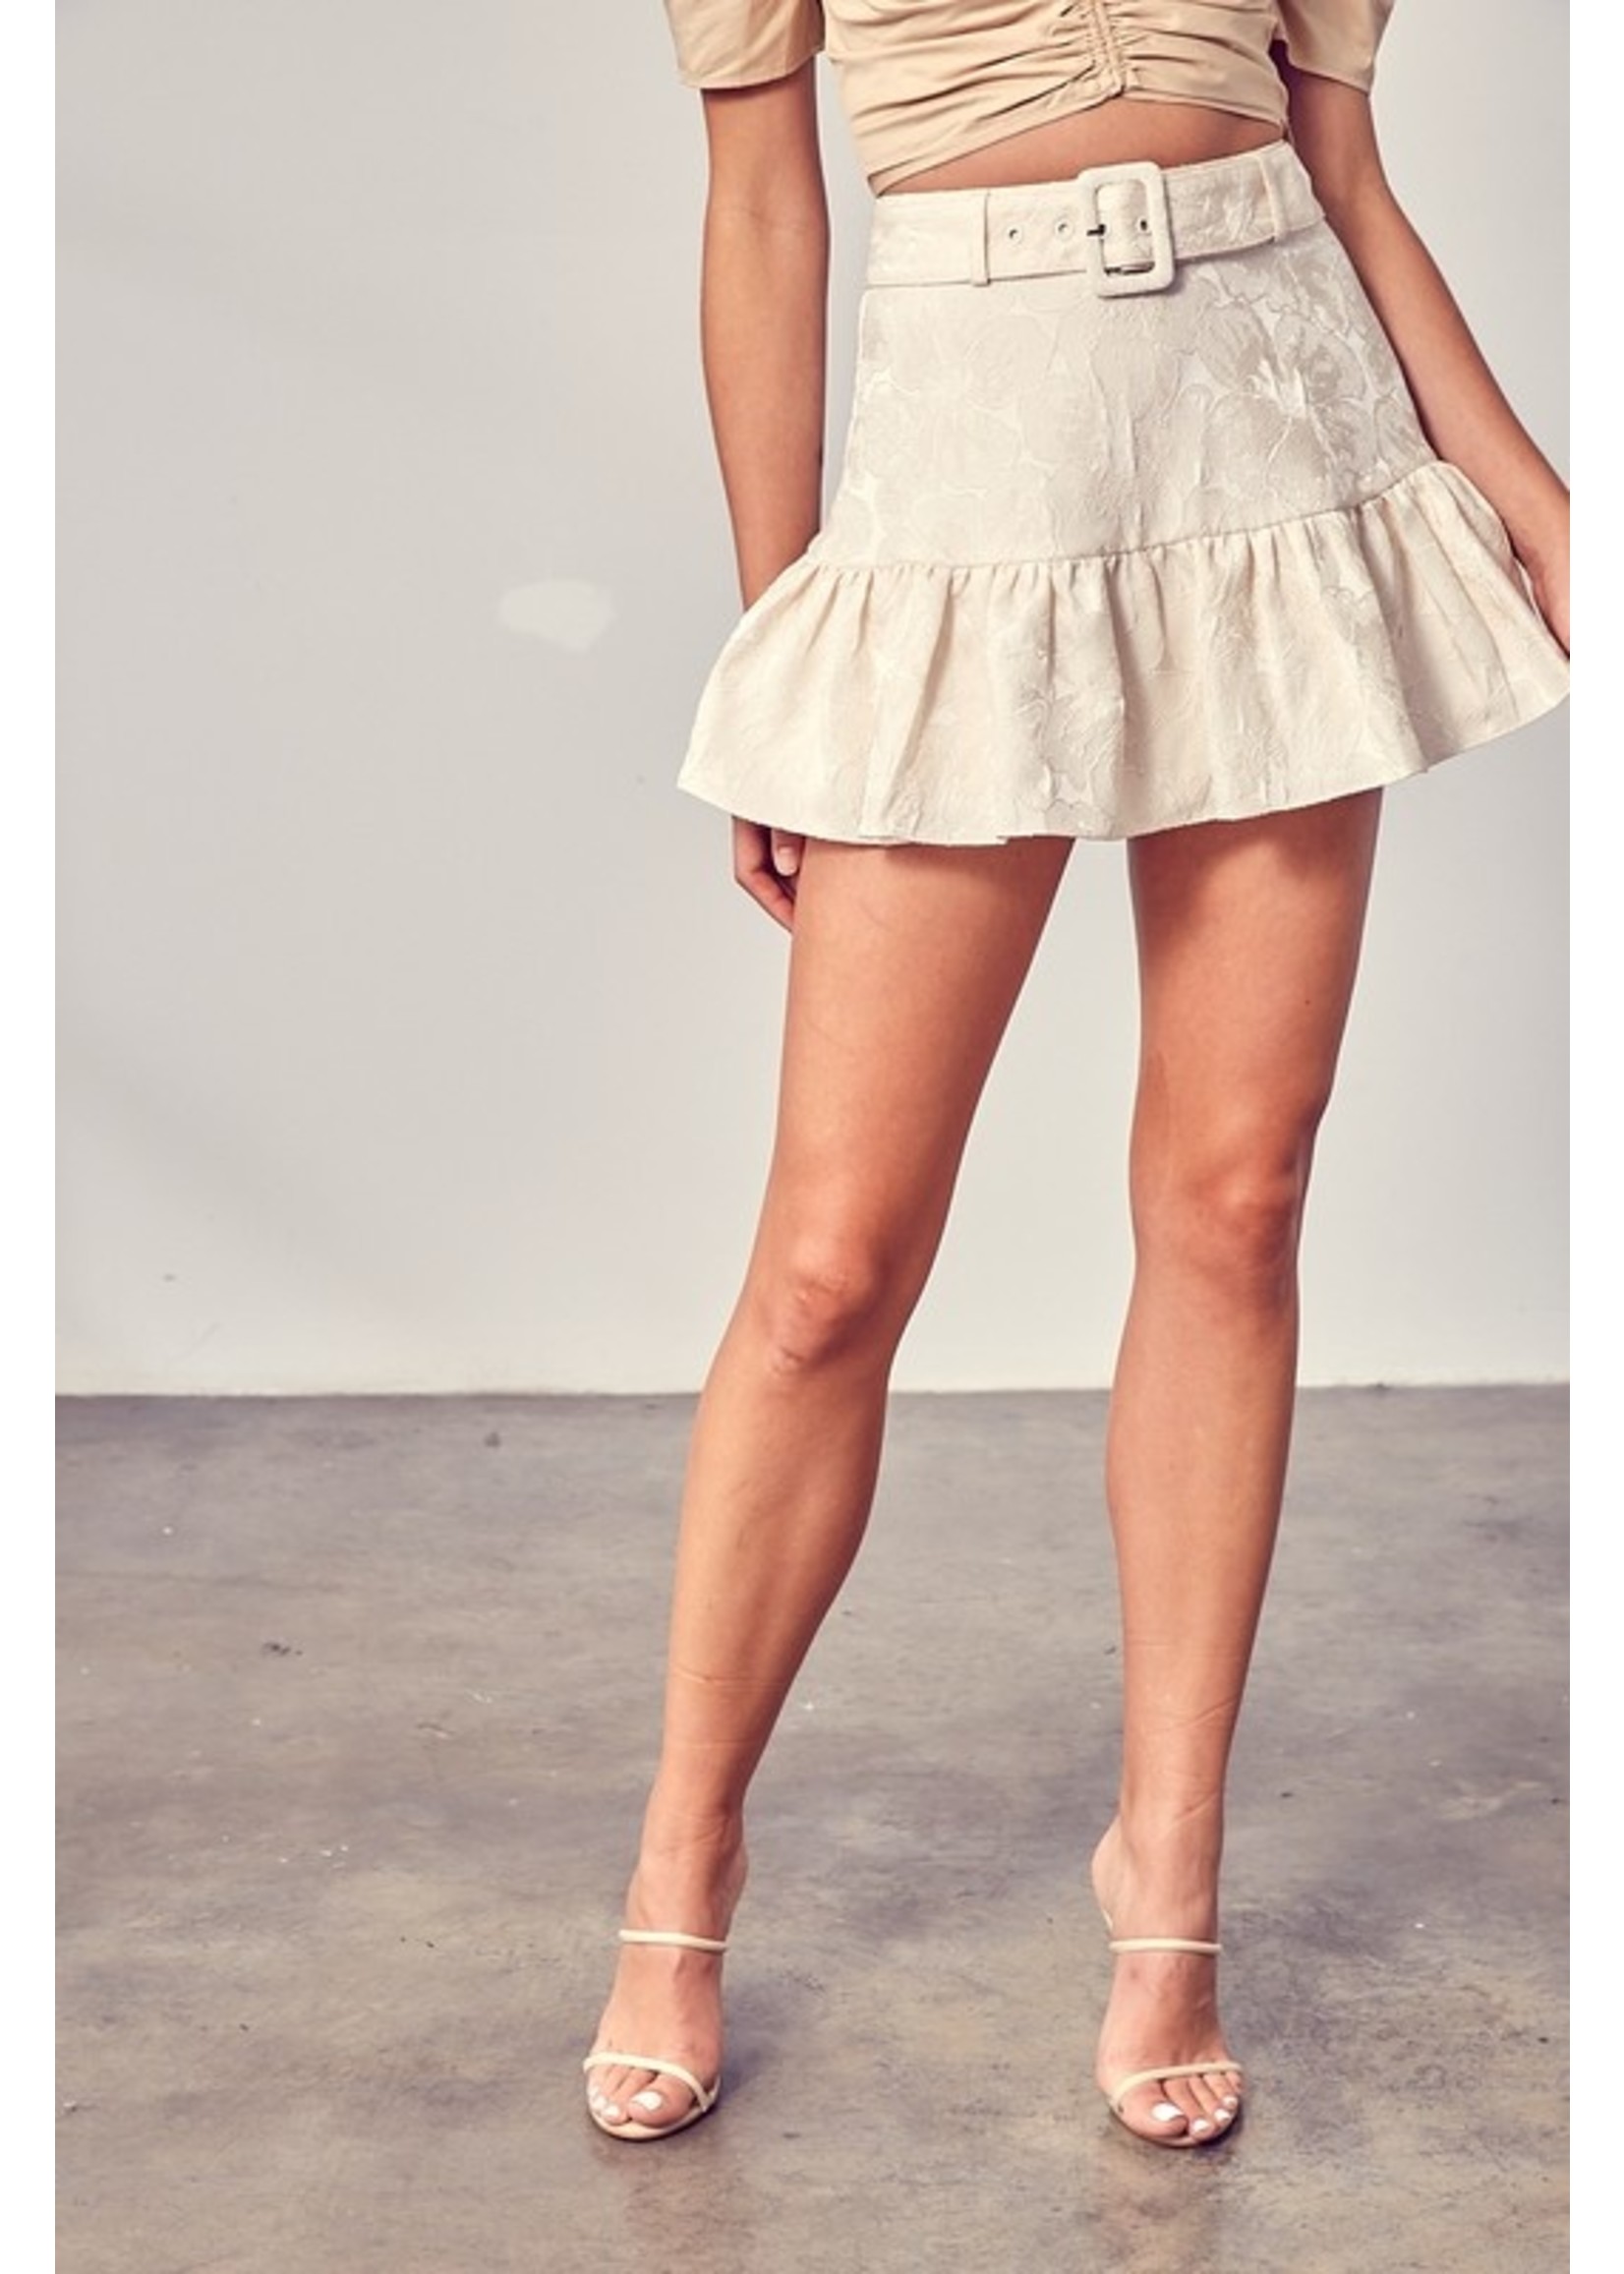 DO + BE Textured Ruffled Mini Skirt With Belt - Y21552